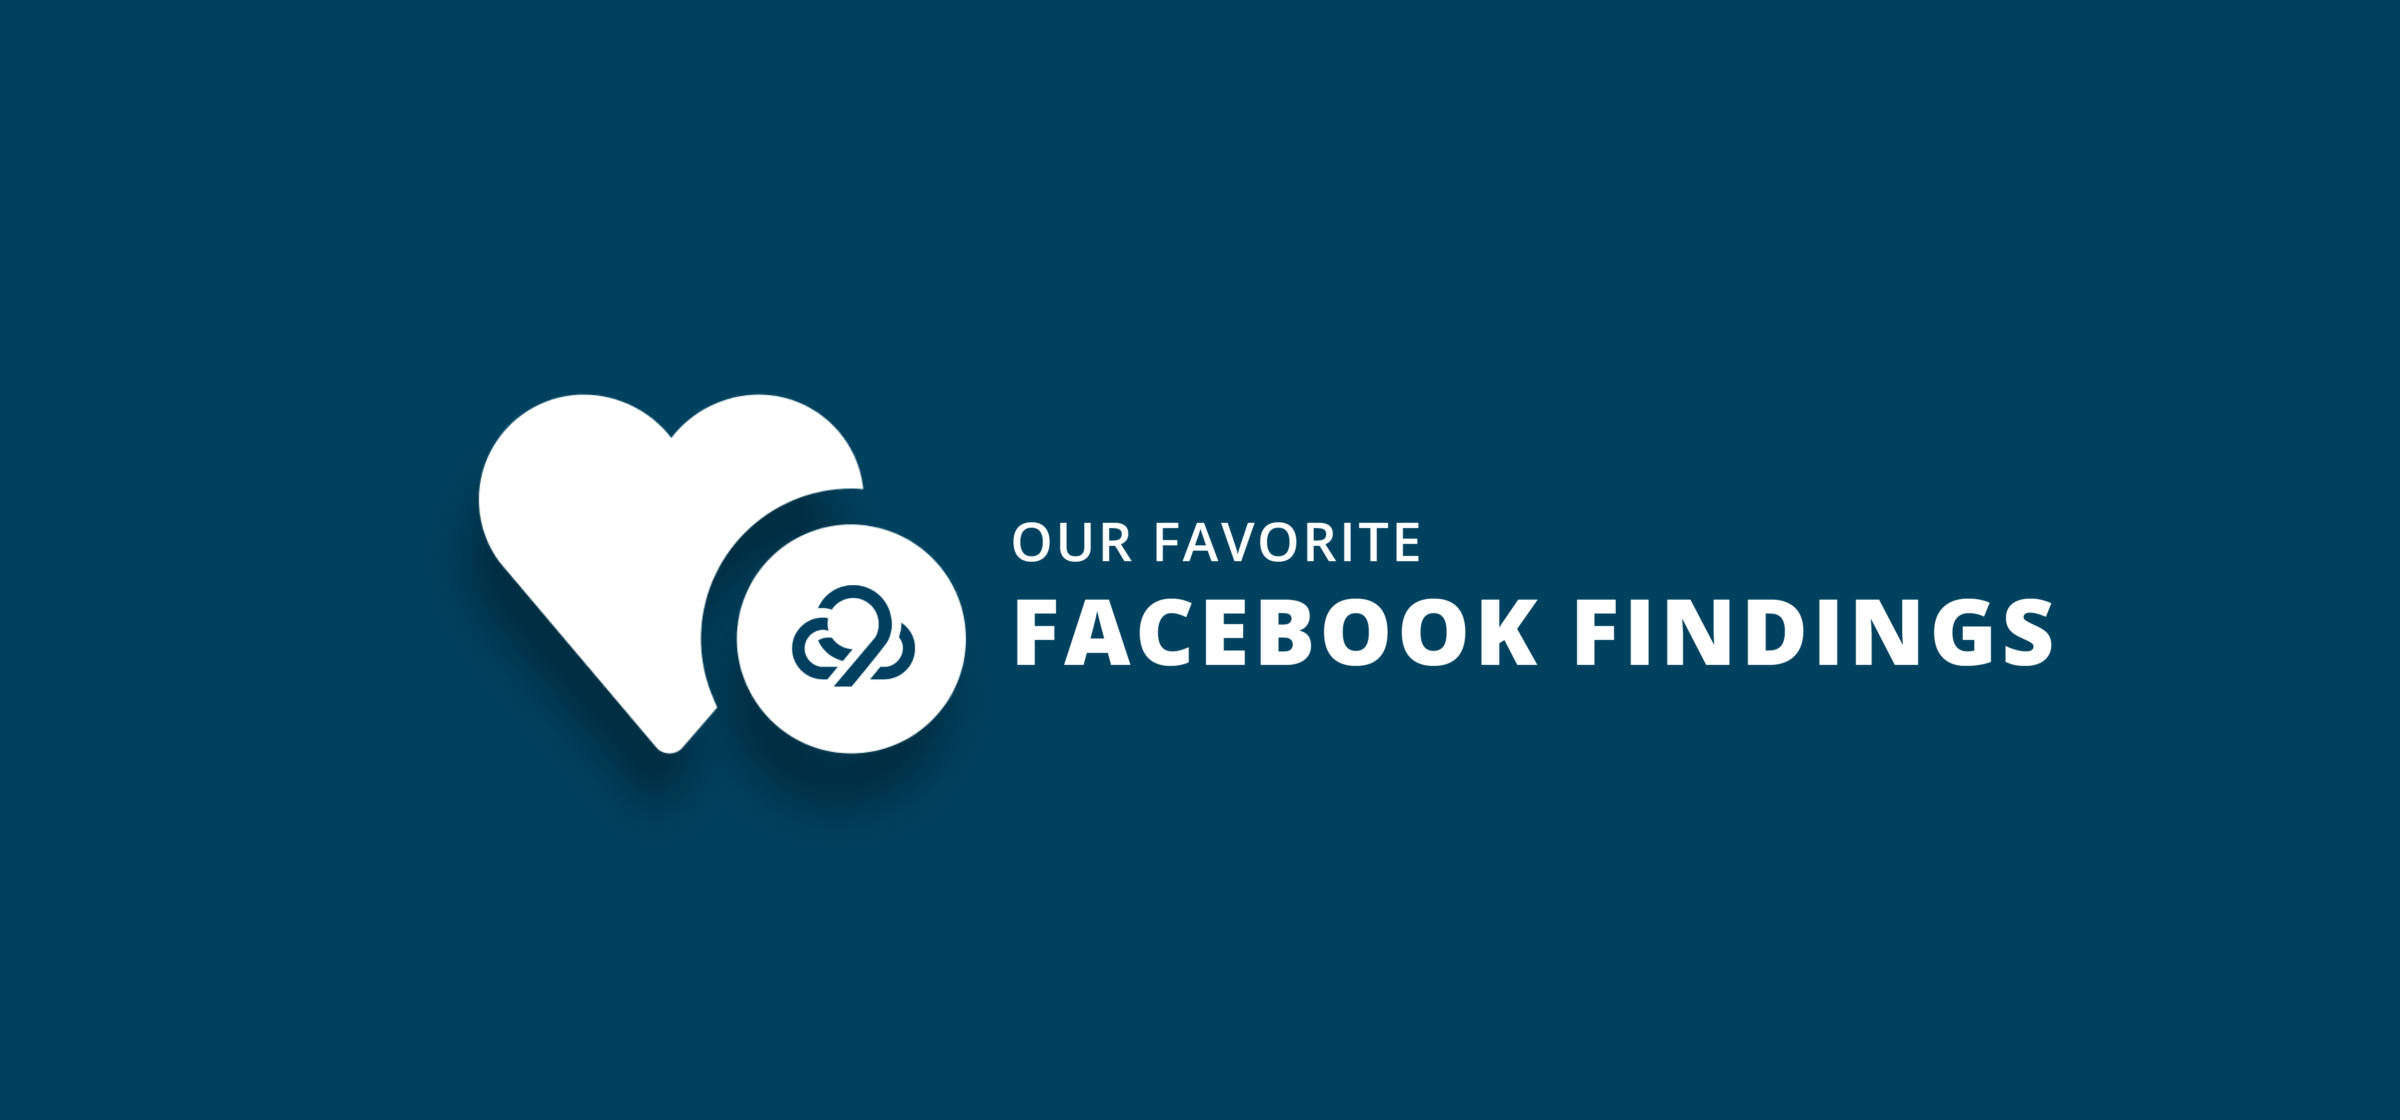 💙 Introducing Our Favorite Facebook Findings